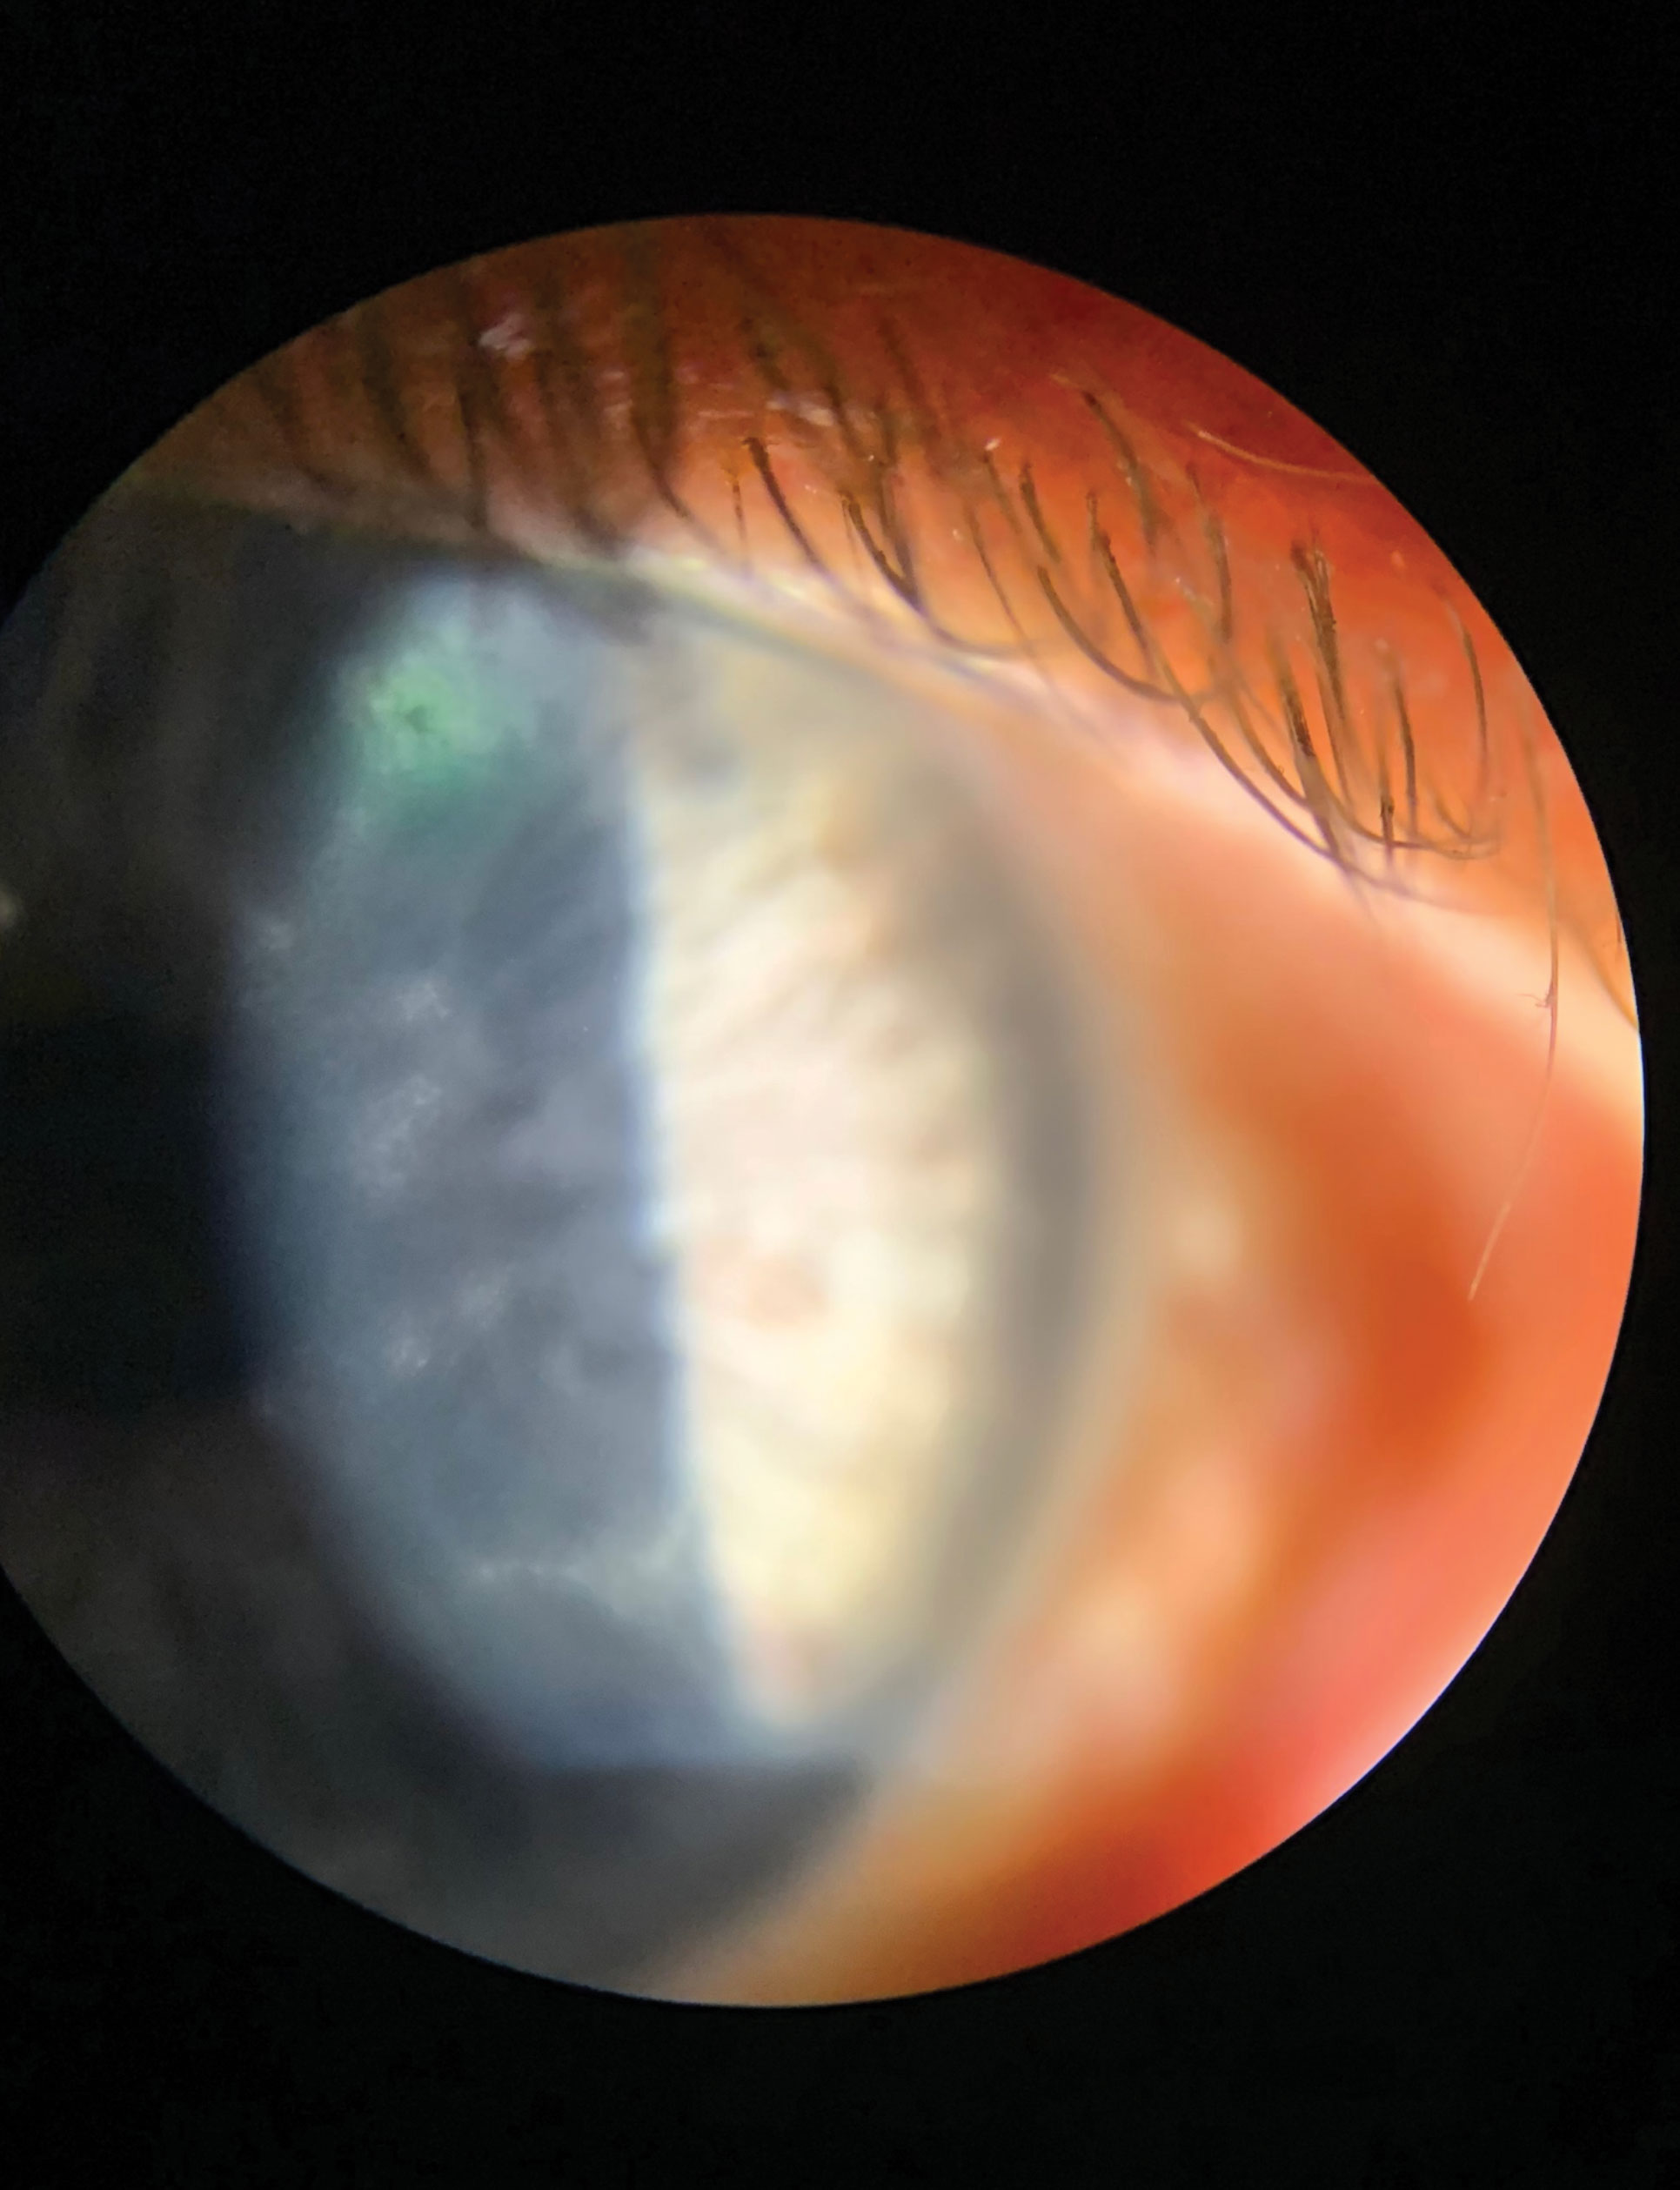 HSV stromal keratitis with or without ulceration can be focal, multifocal or diffuse. This patient has HSV stromal keratitis with epithelial involvement.